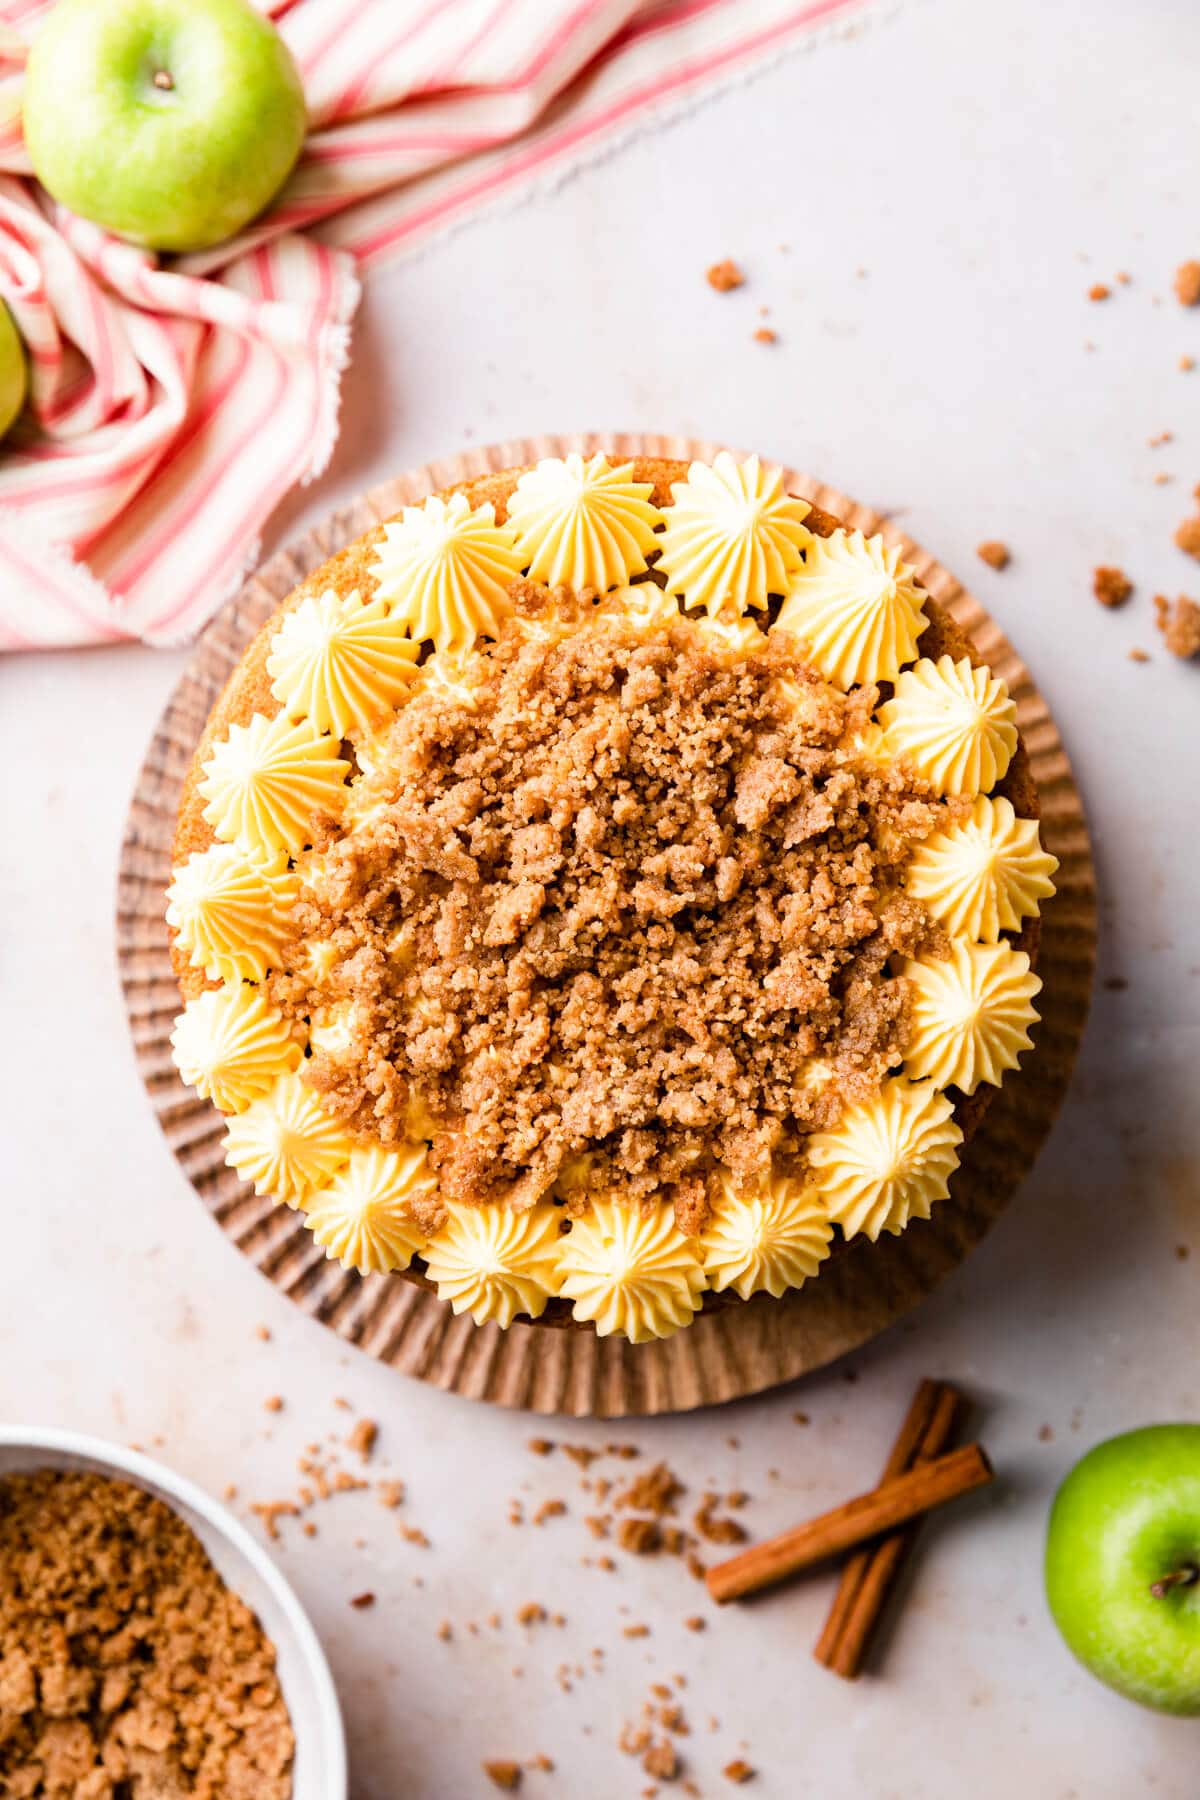 an apple crumble cake with piped buttercream and crumble topping.